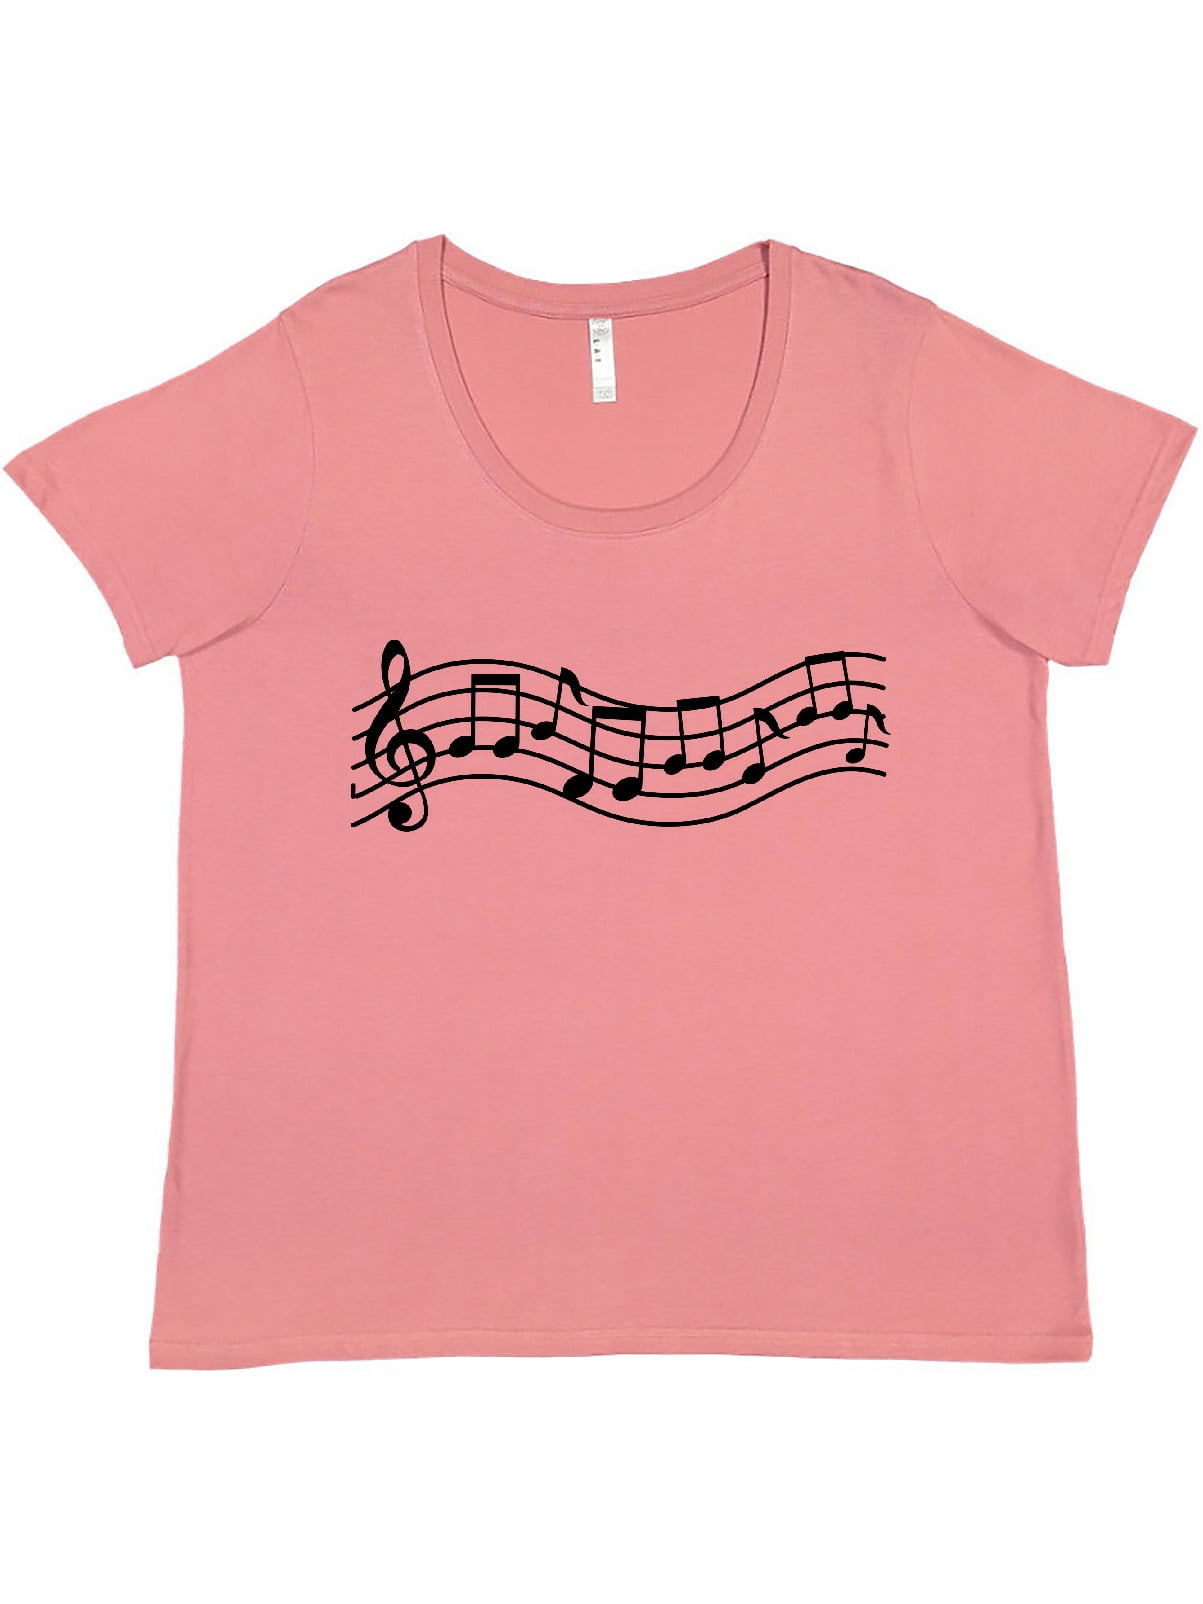 Treble Clef Red Adult T-Shirt 